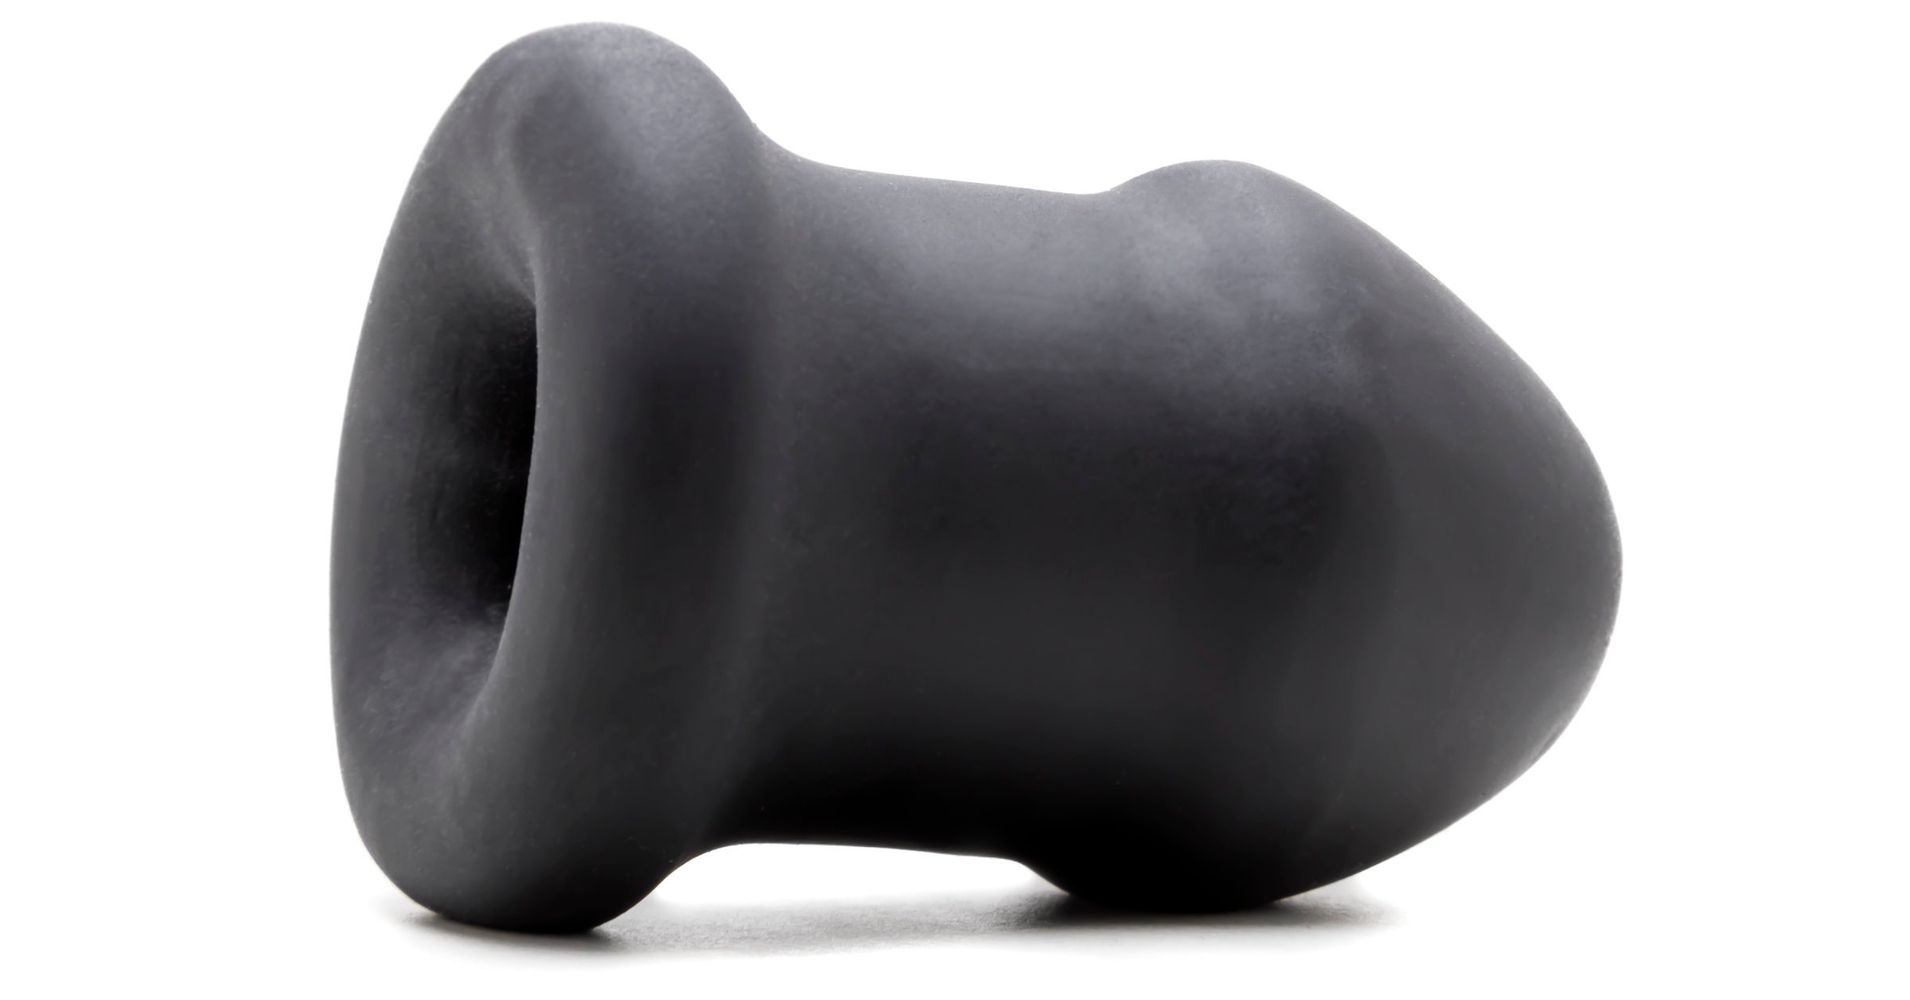 Introducing The First Sex Toy Designed Specifically For